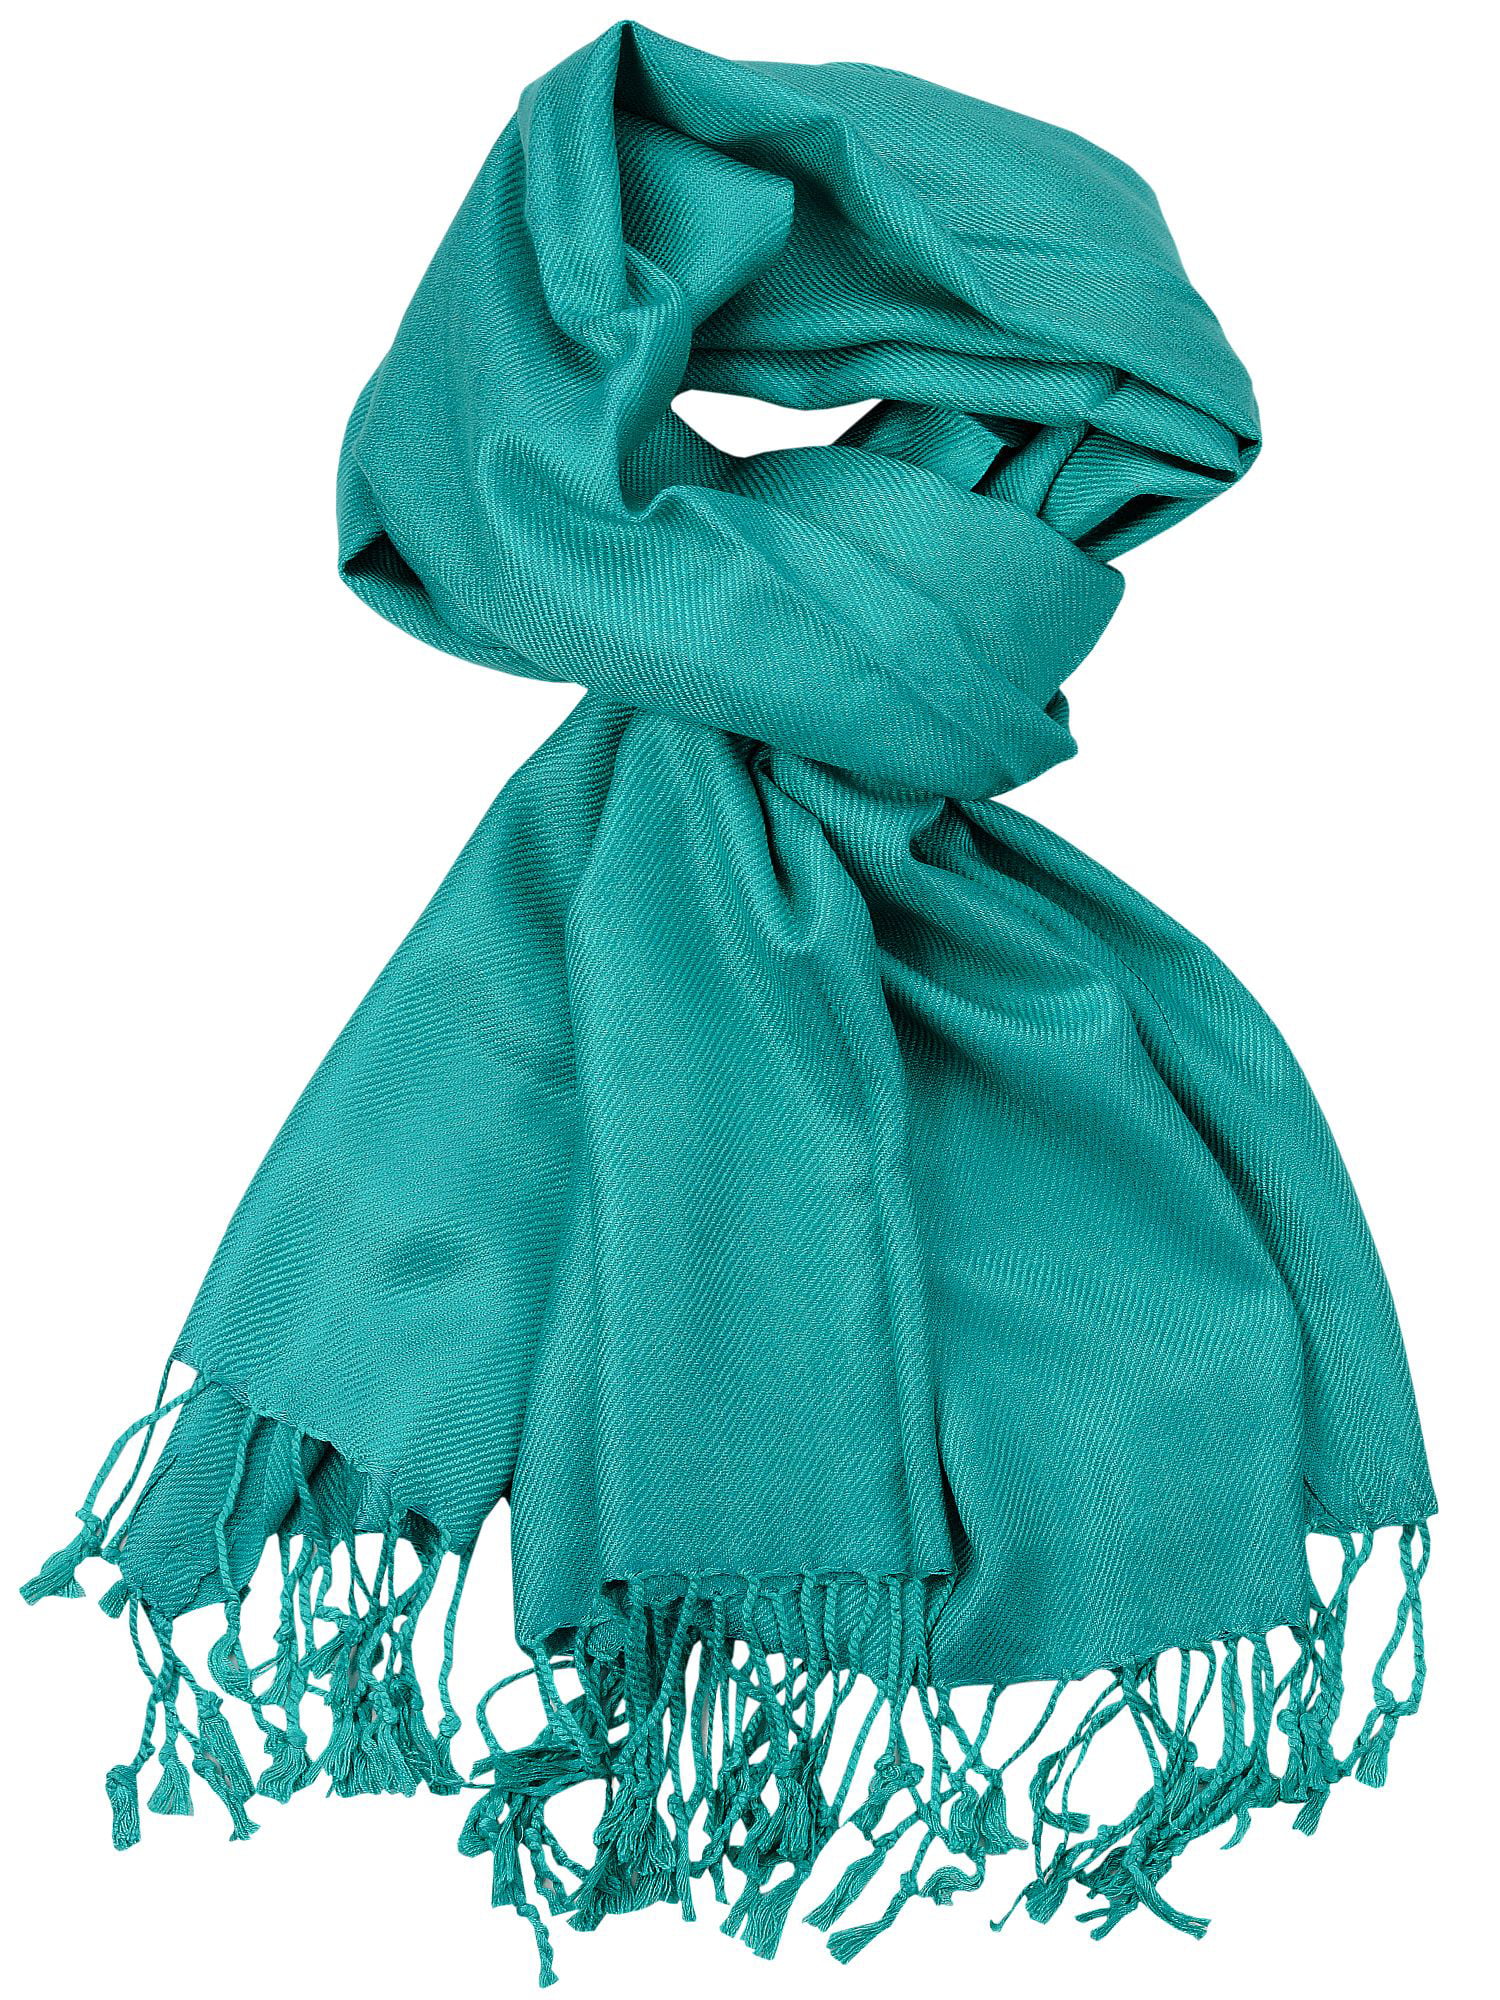 TEAL GREEN GRADUATED TWO TONE BEAUTIFULLY SOFT SILK BLEND SCARF OR PASHMINA 